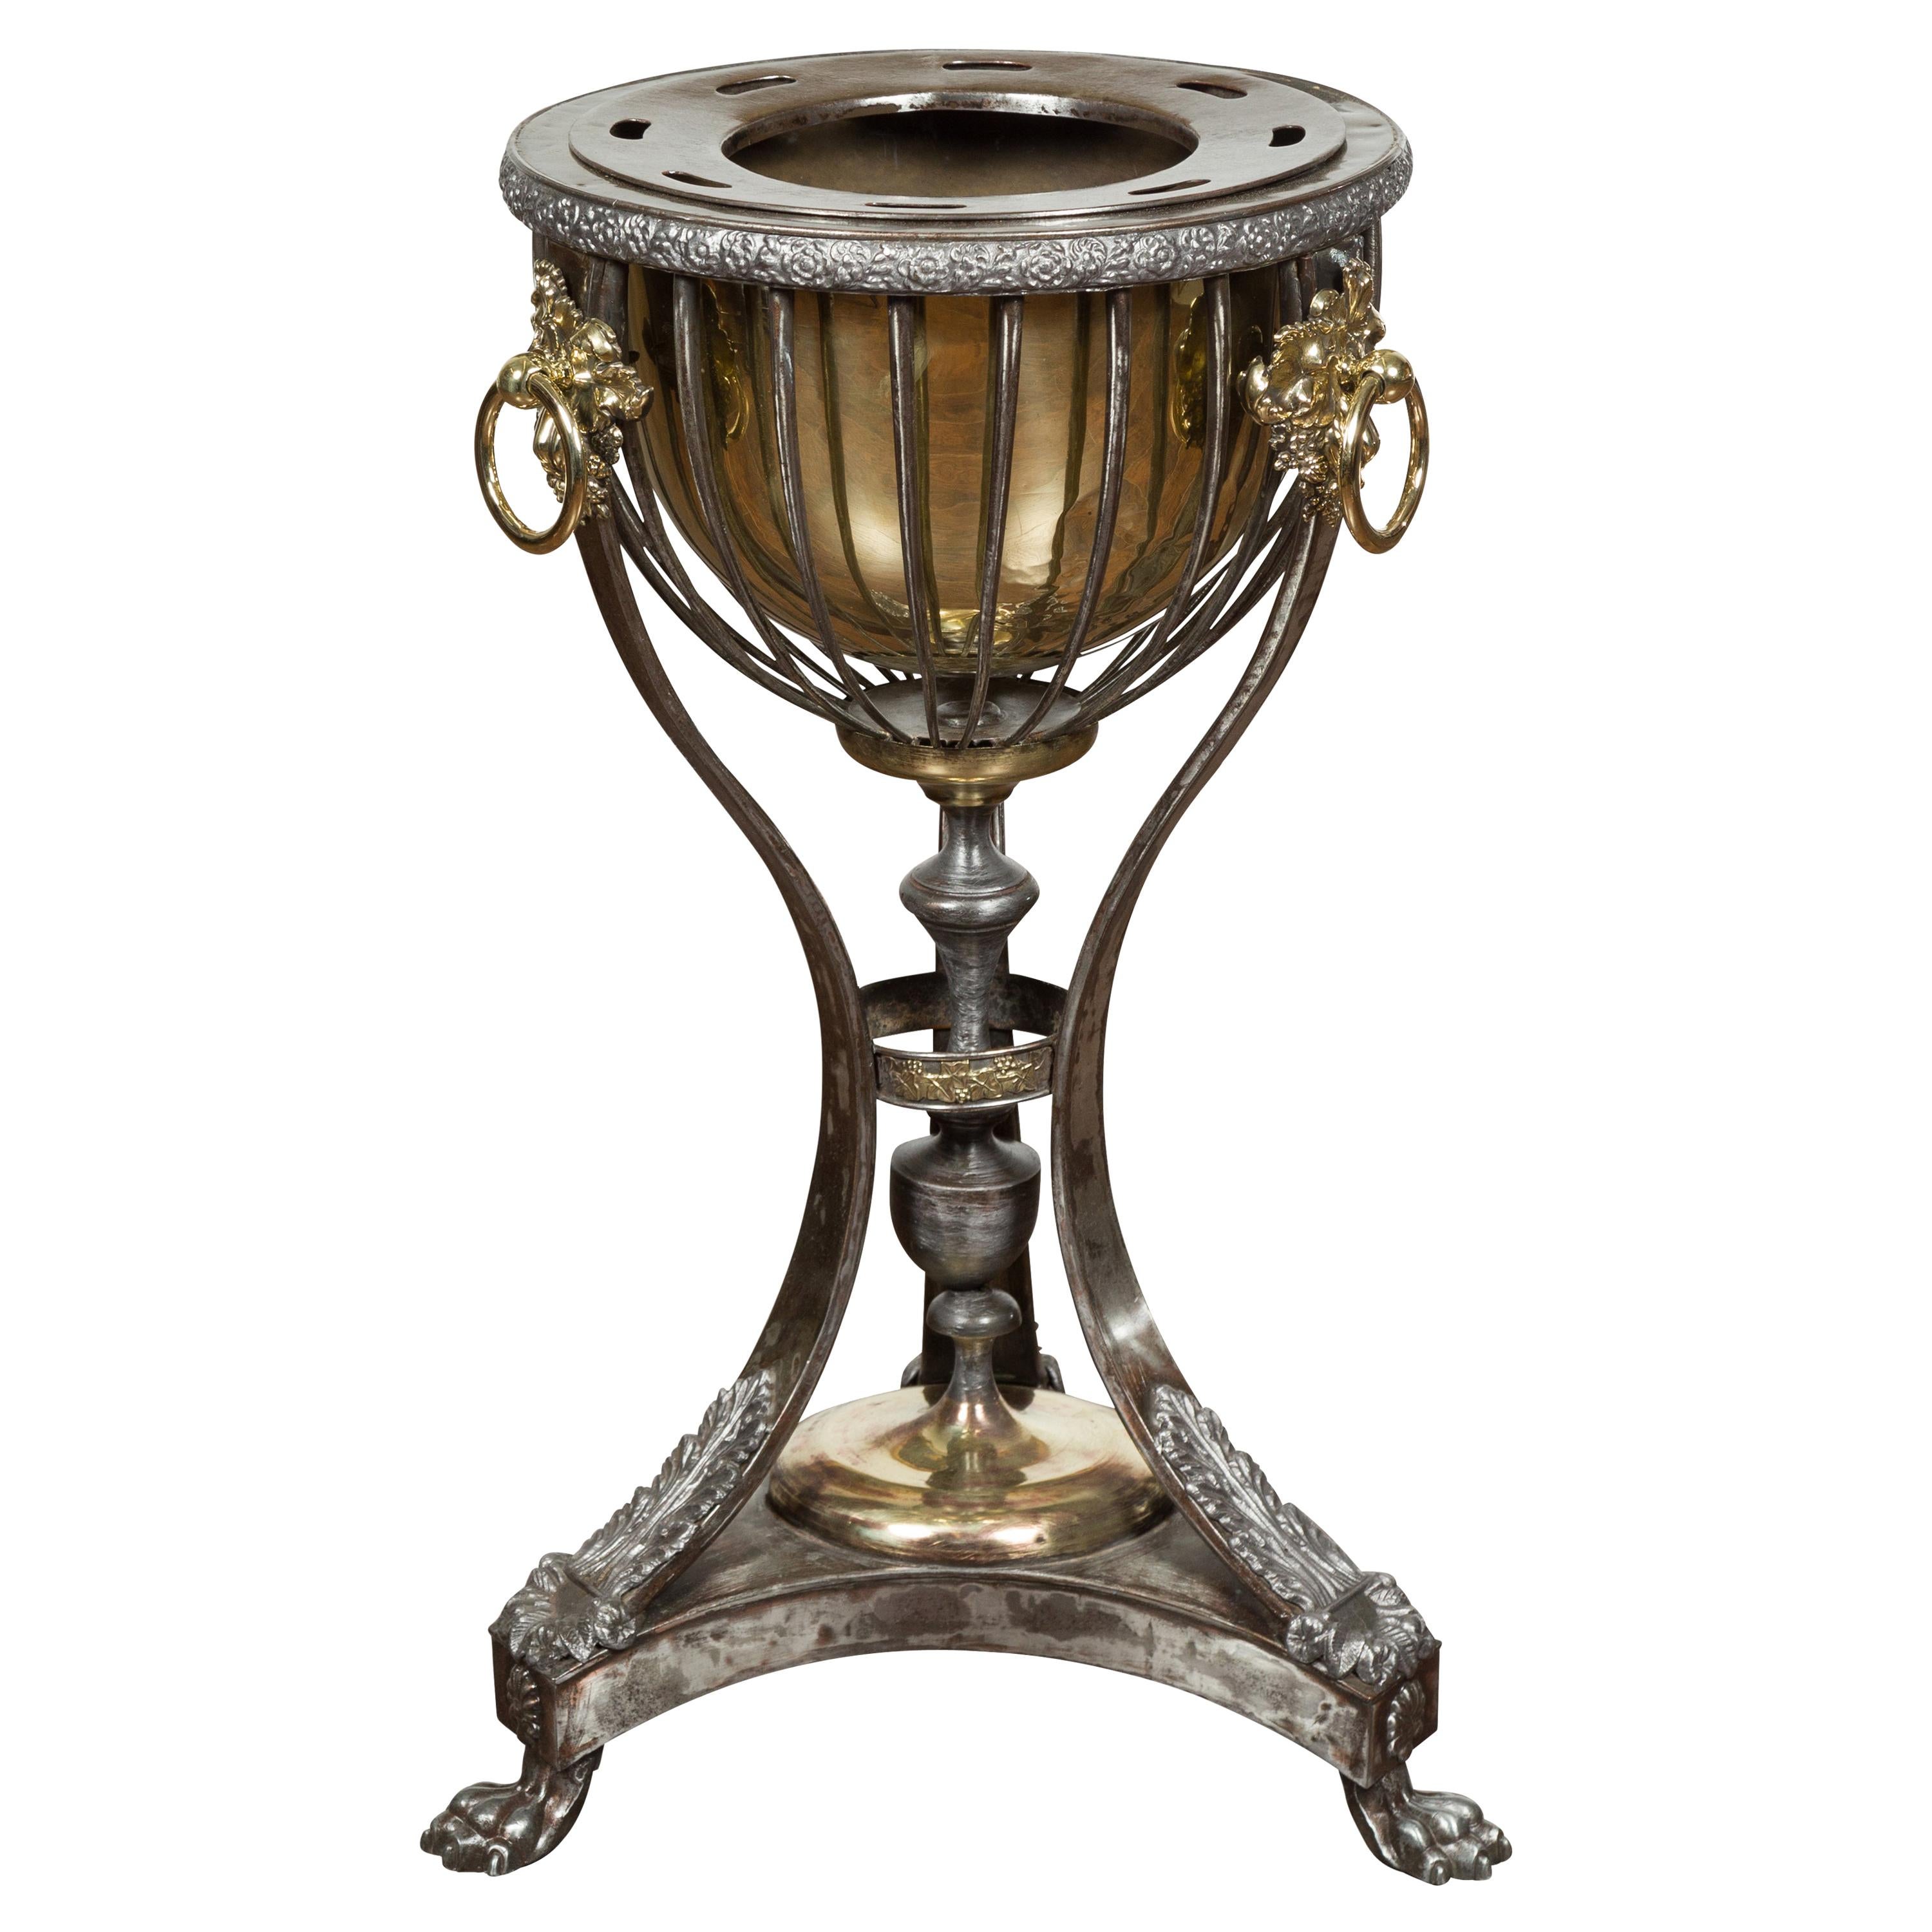 English 1820s Steel and Brass Tripod Wine Cooler with Foliage and Fruit Motifs For Sale